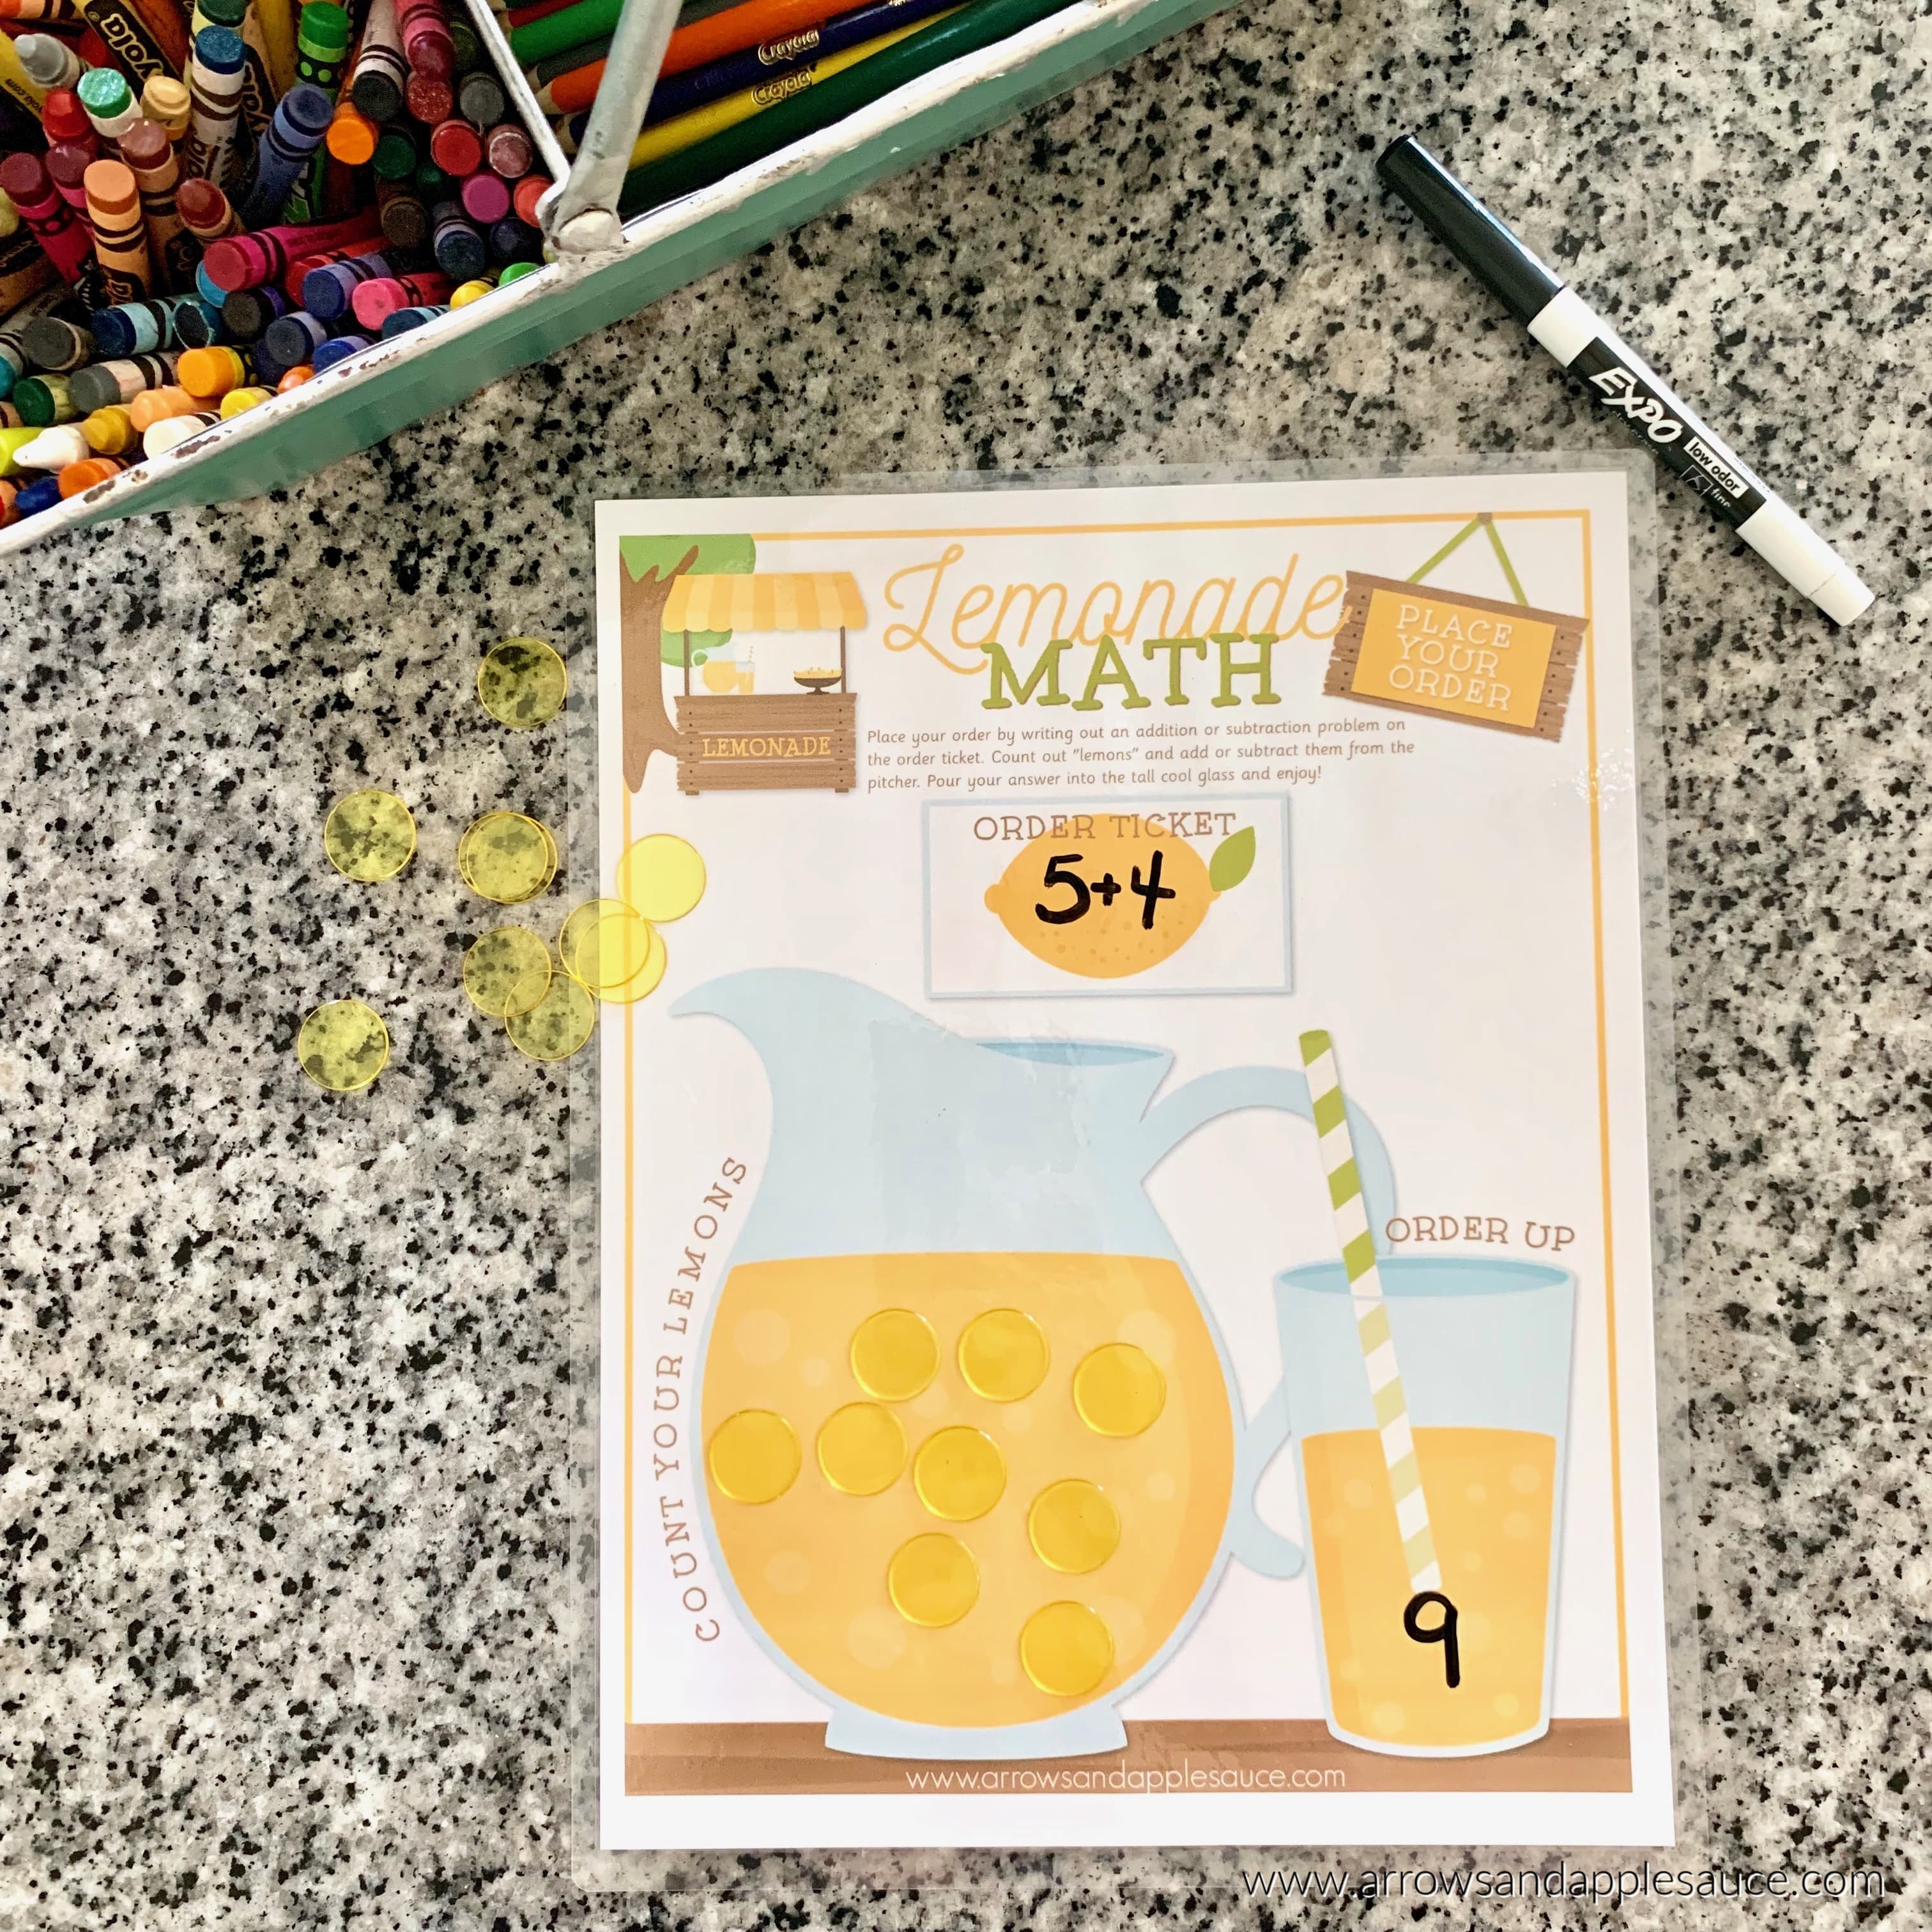 This printable math game is my answer to fostering my daughter's love of math while limiting time with her favorite math app. Horray for hands on learning! #preschoolmath #homeschoolpreschool #kindergartenmath #homeschoolprintables #learningathome #additionandsubtraction #basicmathskills #printablemathworksheet #kidsmathgame